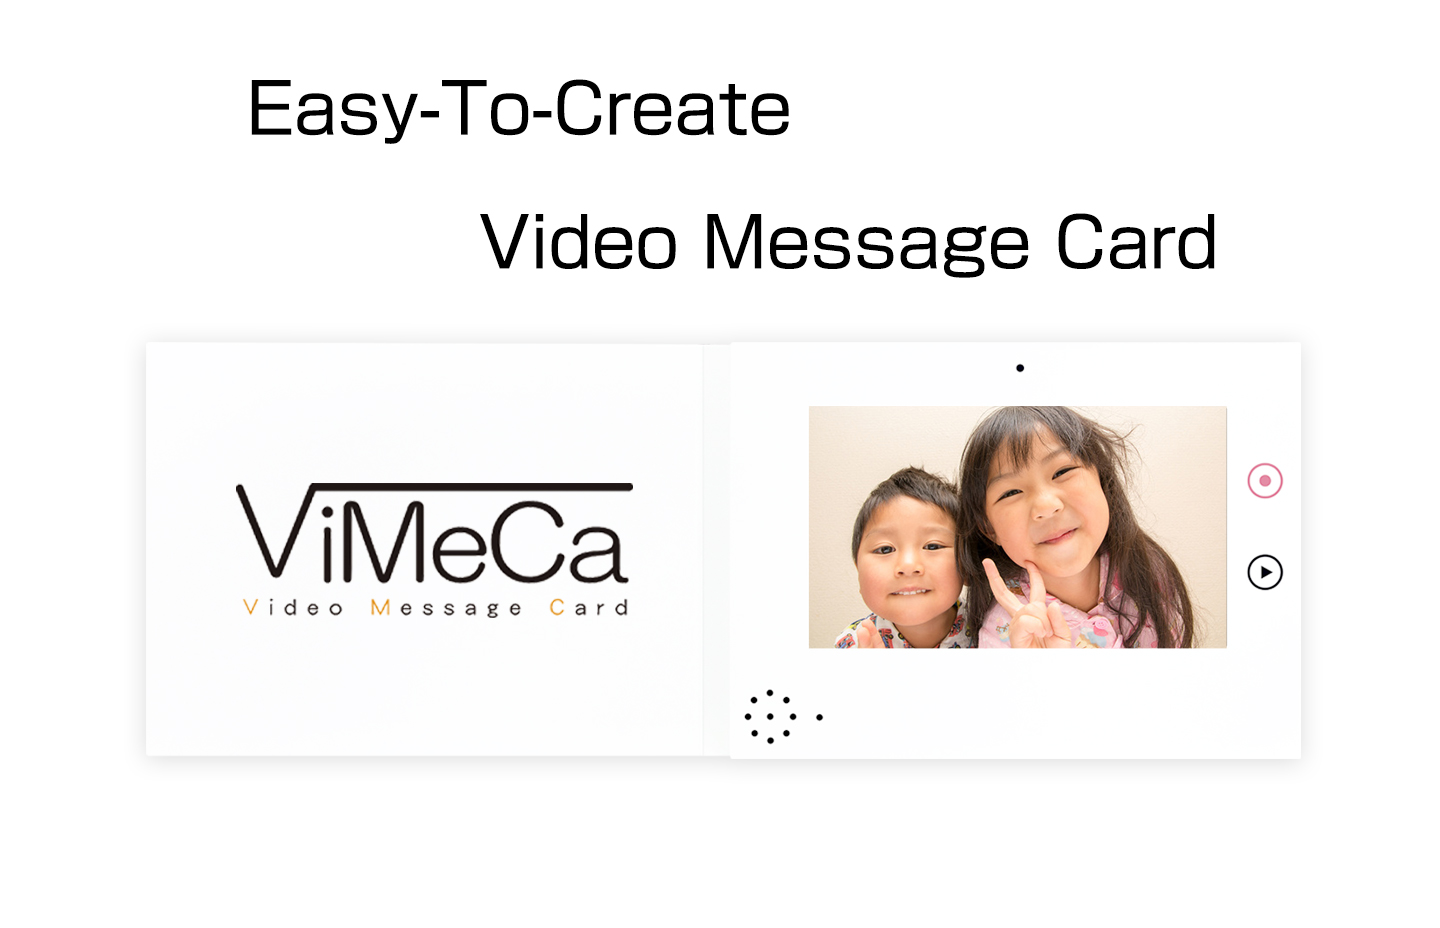 Easy-To-Create Video Message Card